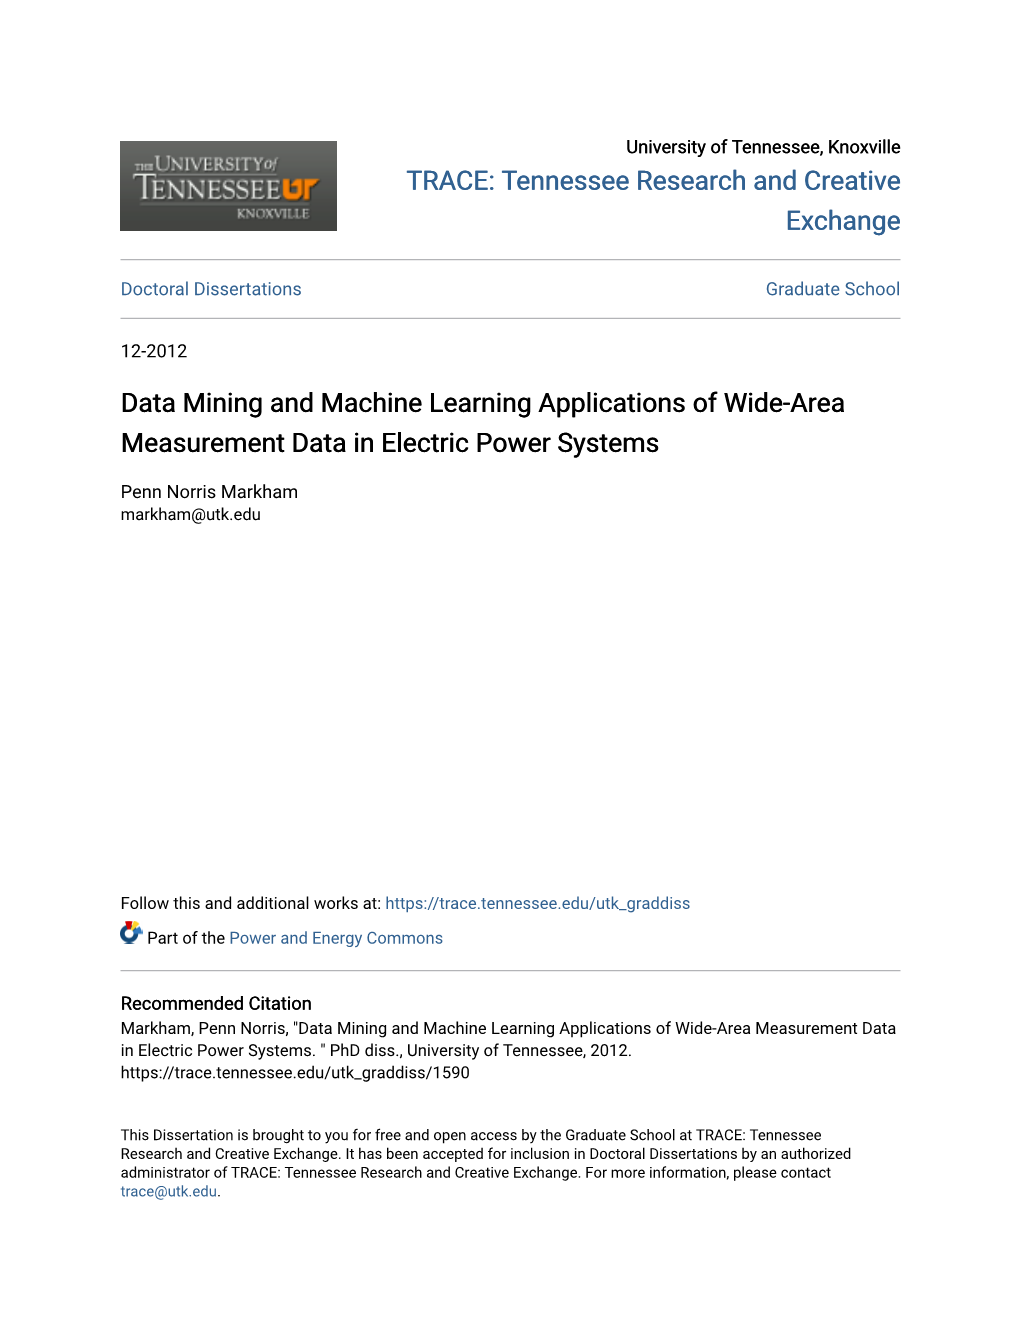 Data Mining and Machine Learning Applications of Wide-Area Measurement Data in Electric Power Systems